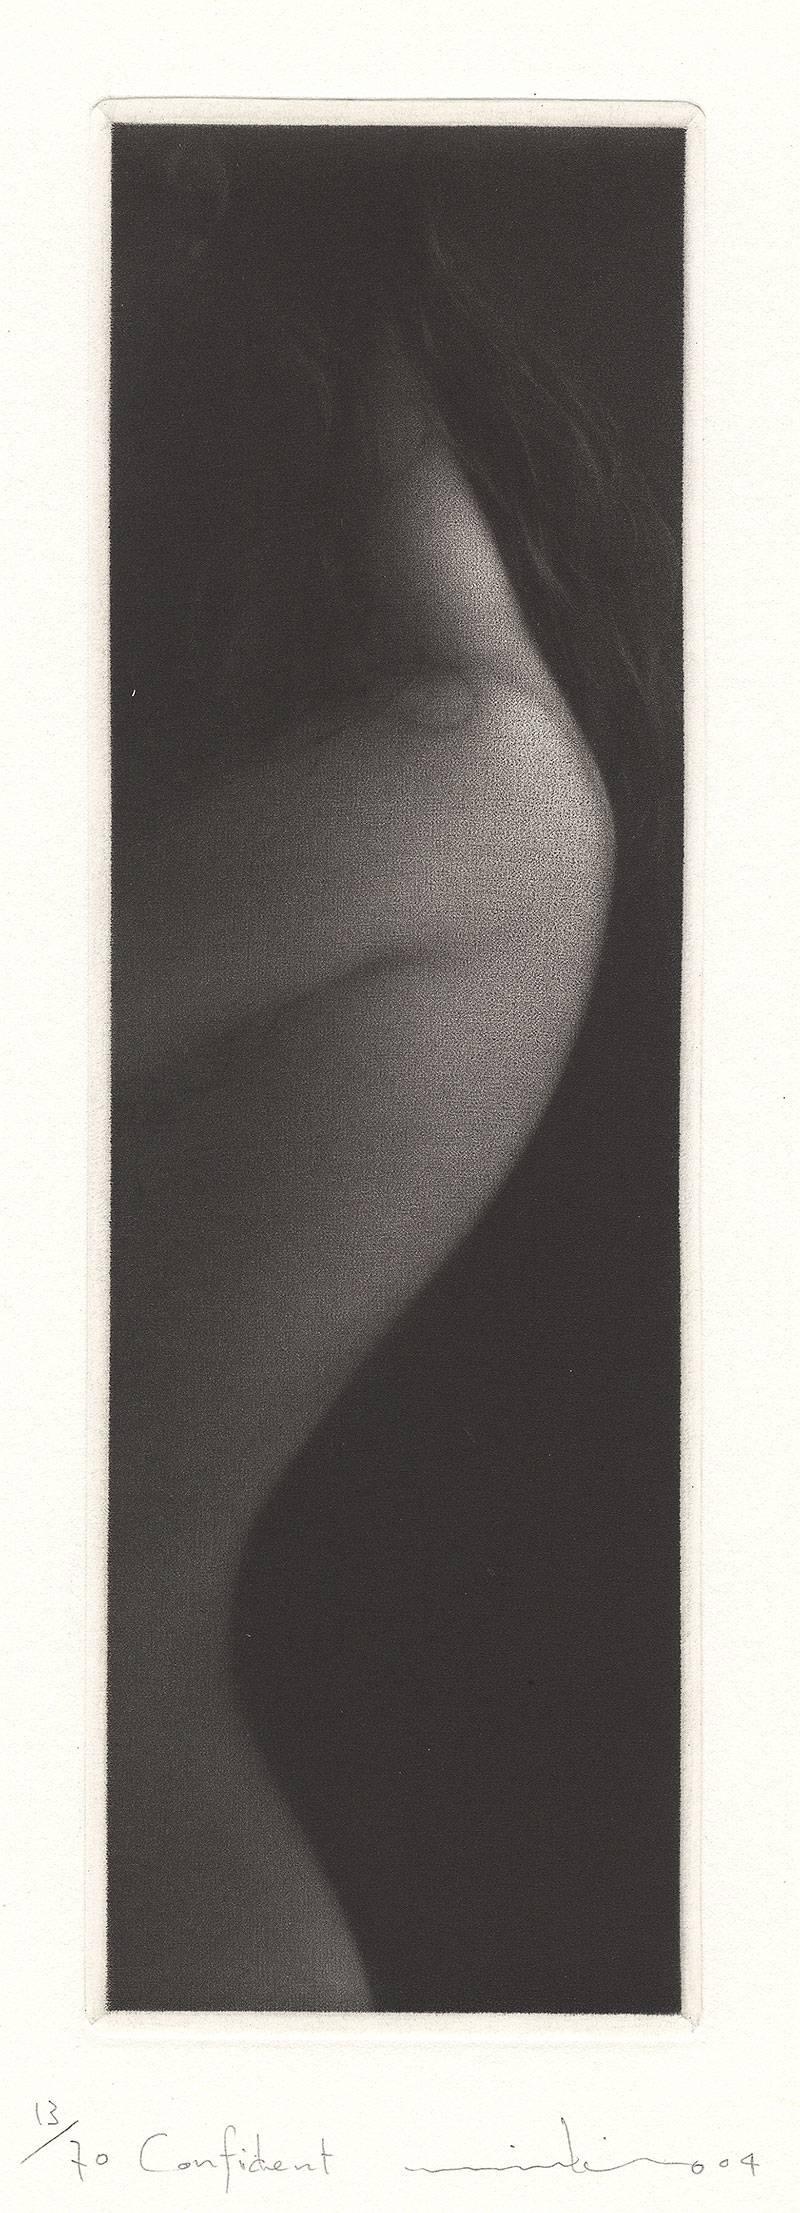 Mikio Watanabe Nude Print - Confident (profile of sensual young woman with wisps of hair on her neck)